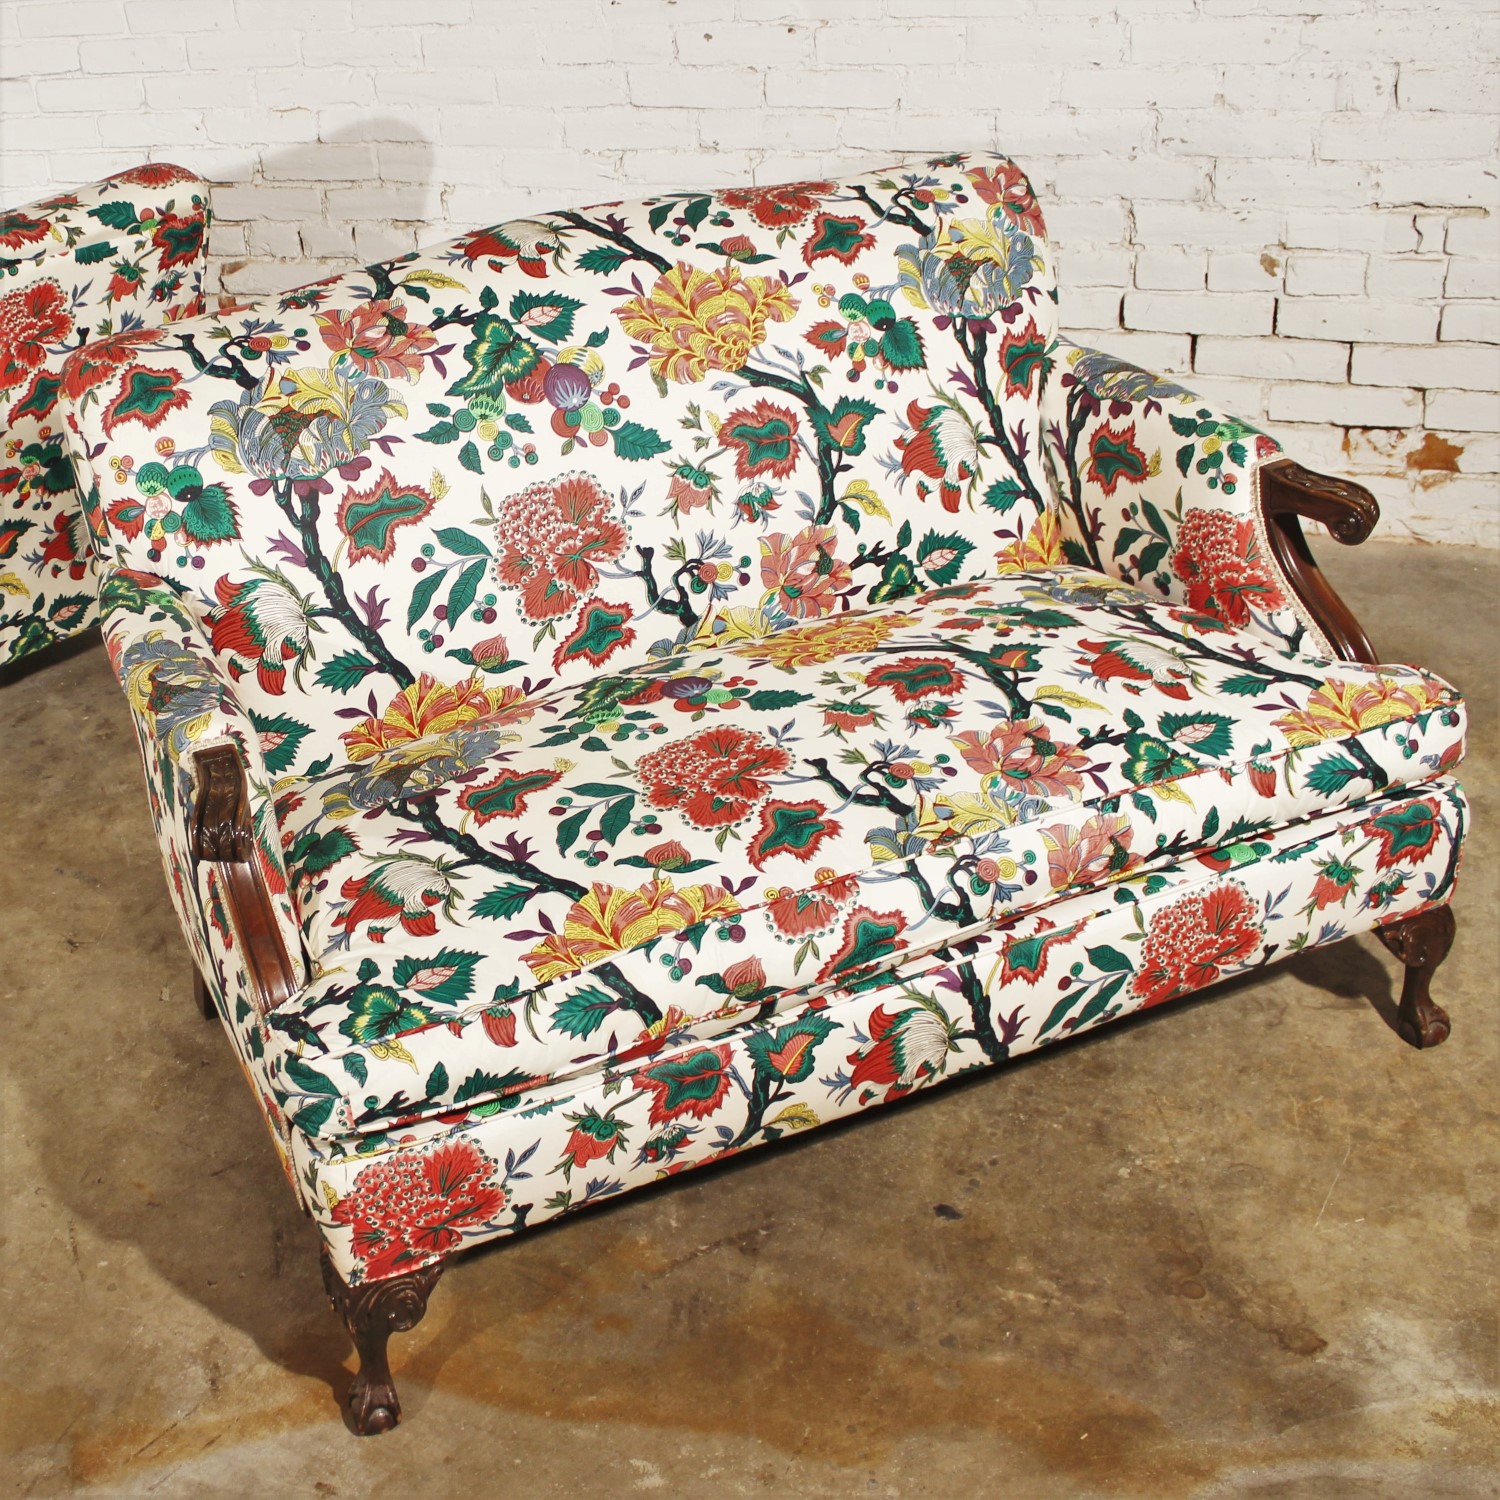 Antique Bold and Bright English Club-Style Floral Loveseat - ONLY ONE